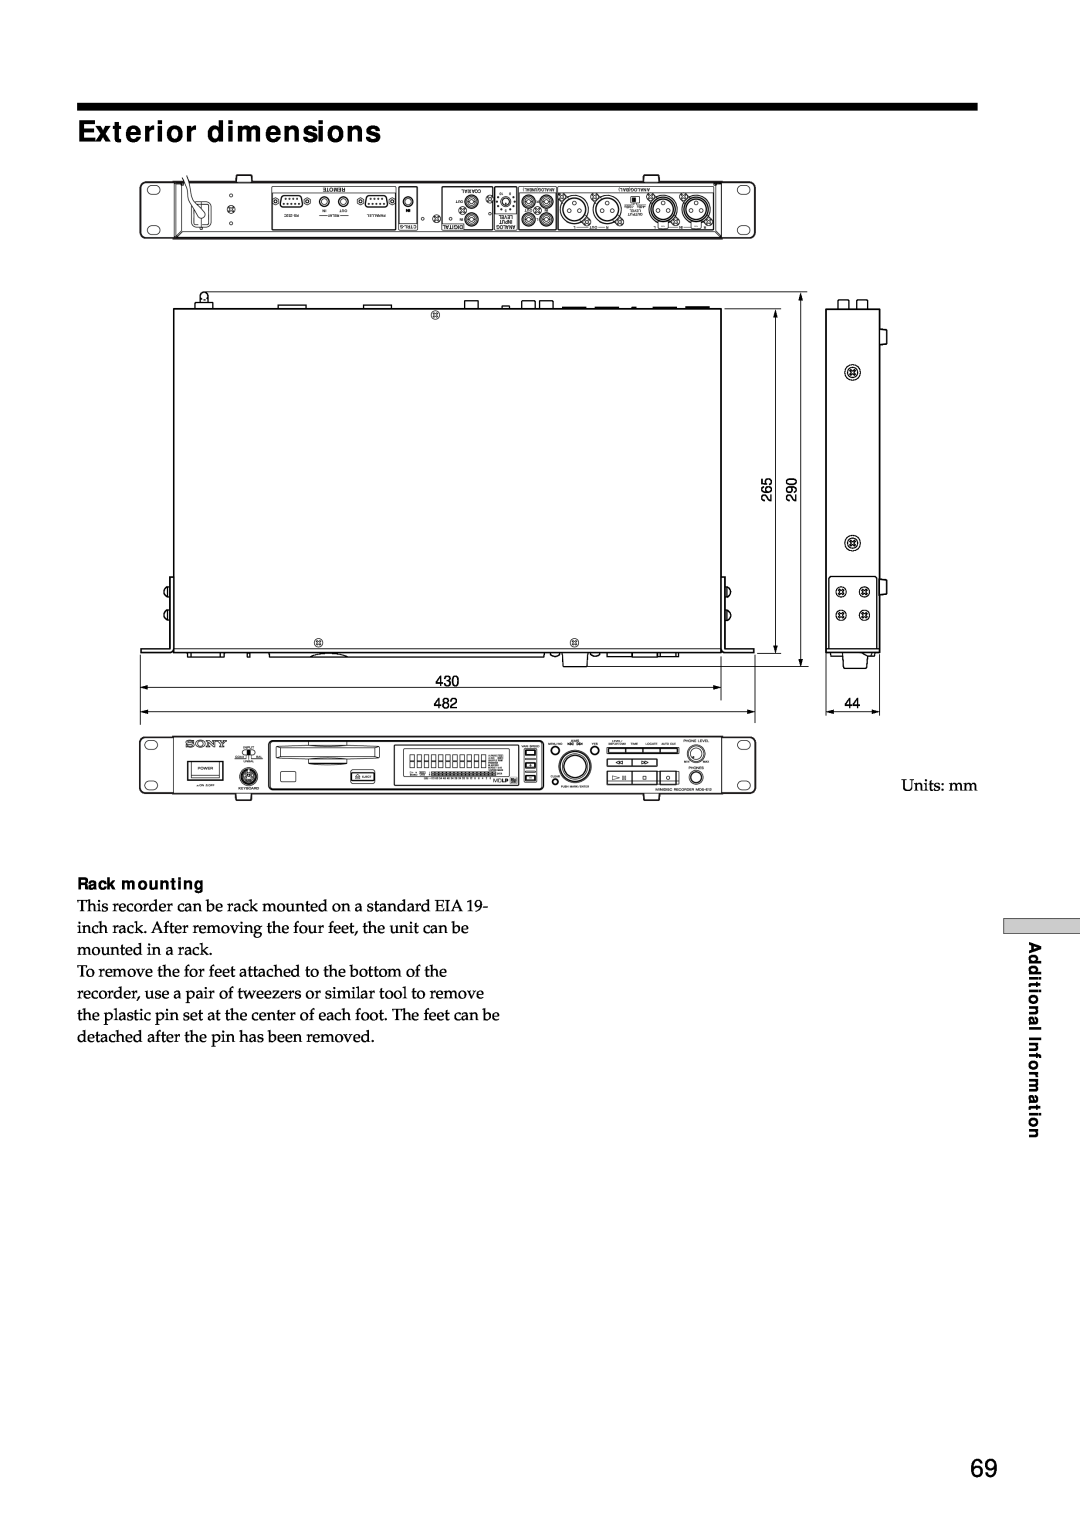 Sony MDS-E12 operating instructions Exterior dimensions, Rack mounting, Additional Information 